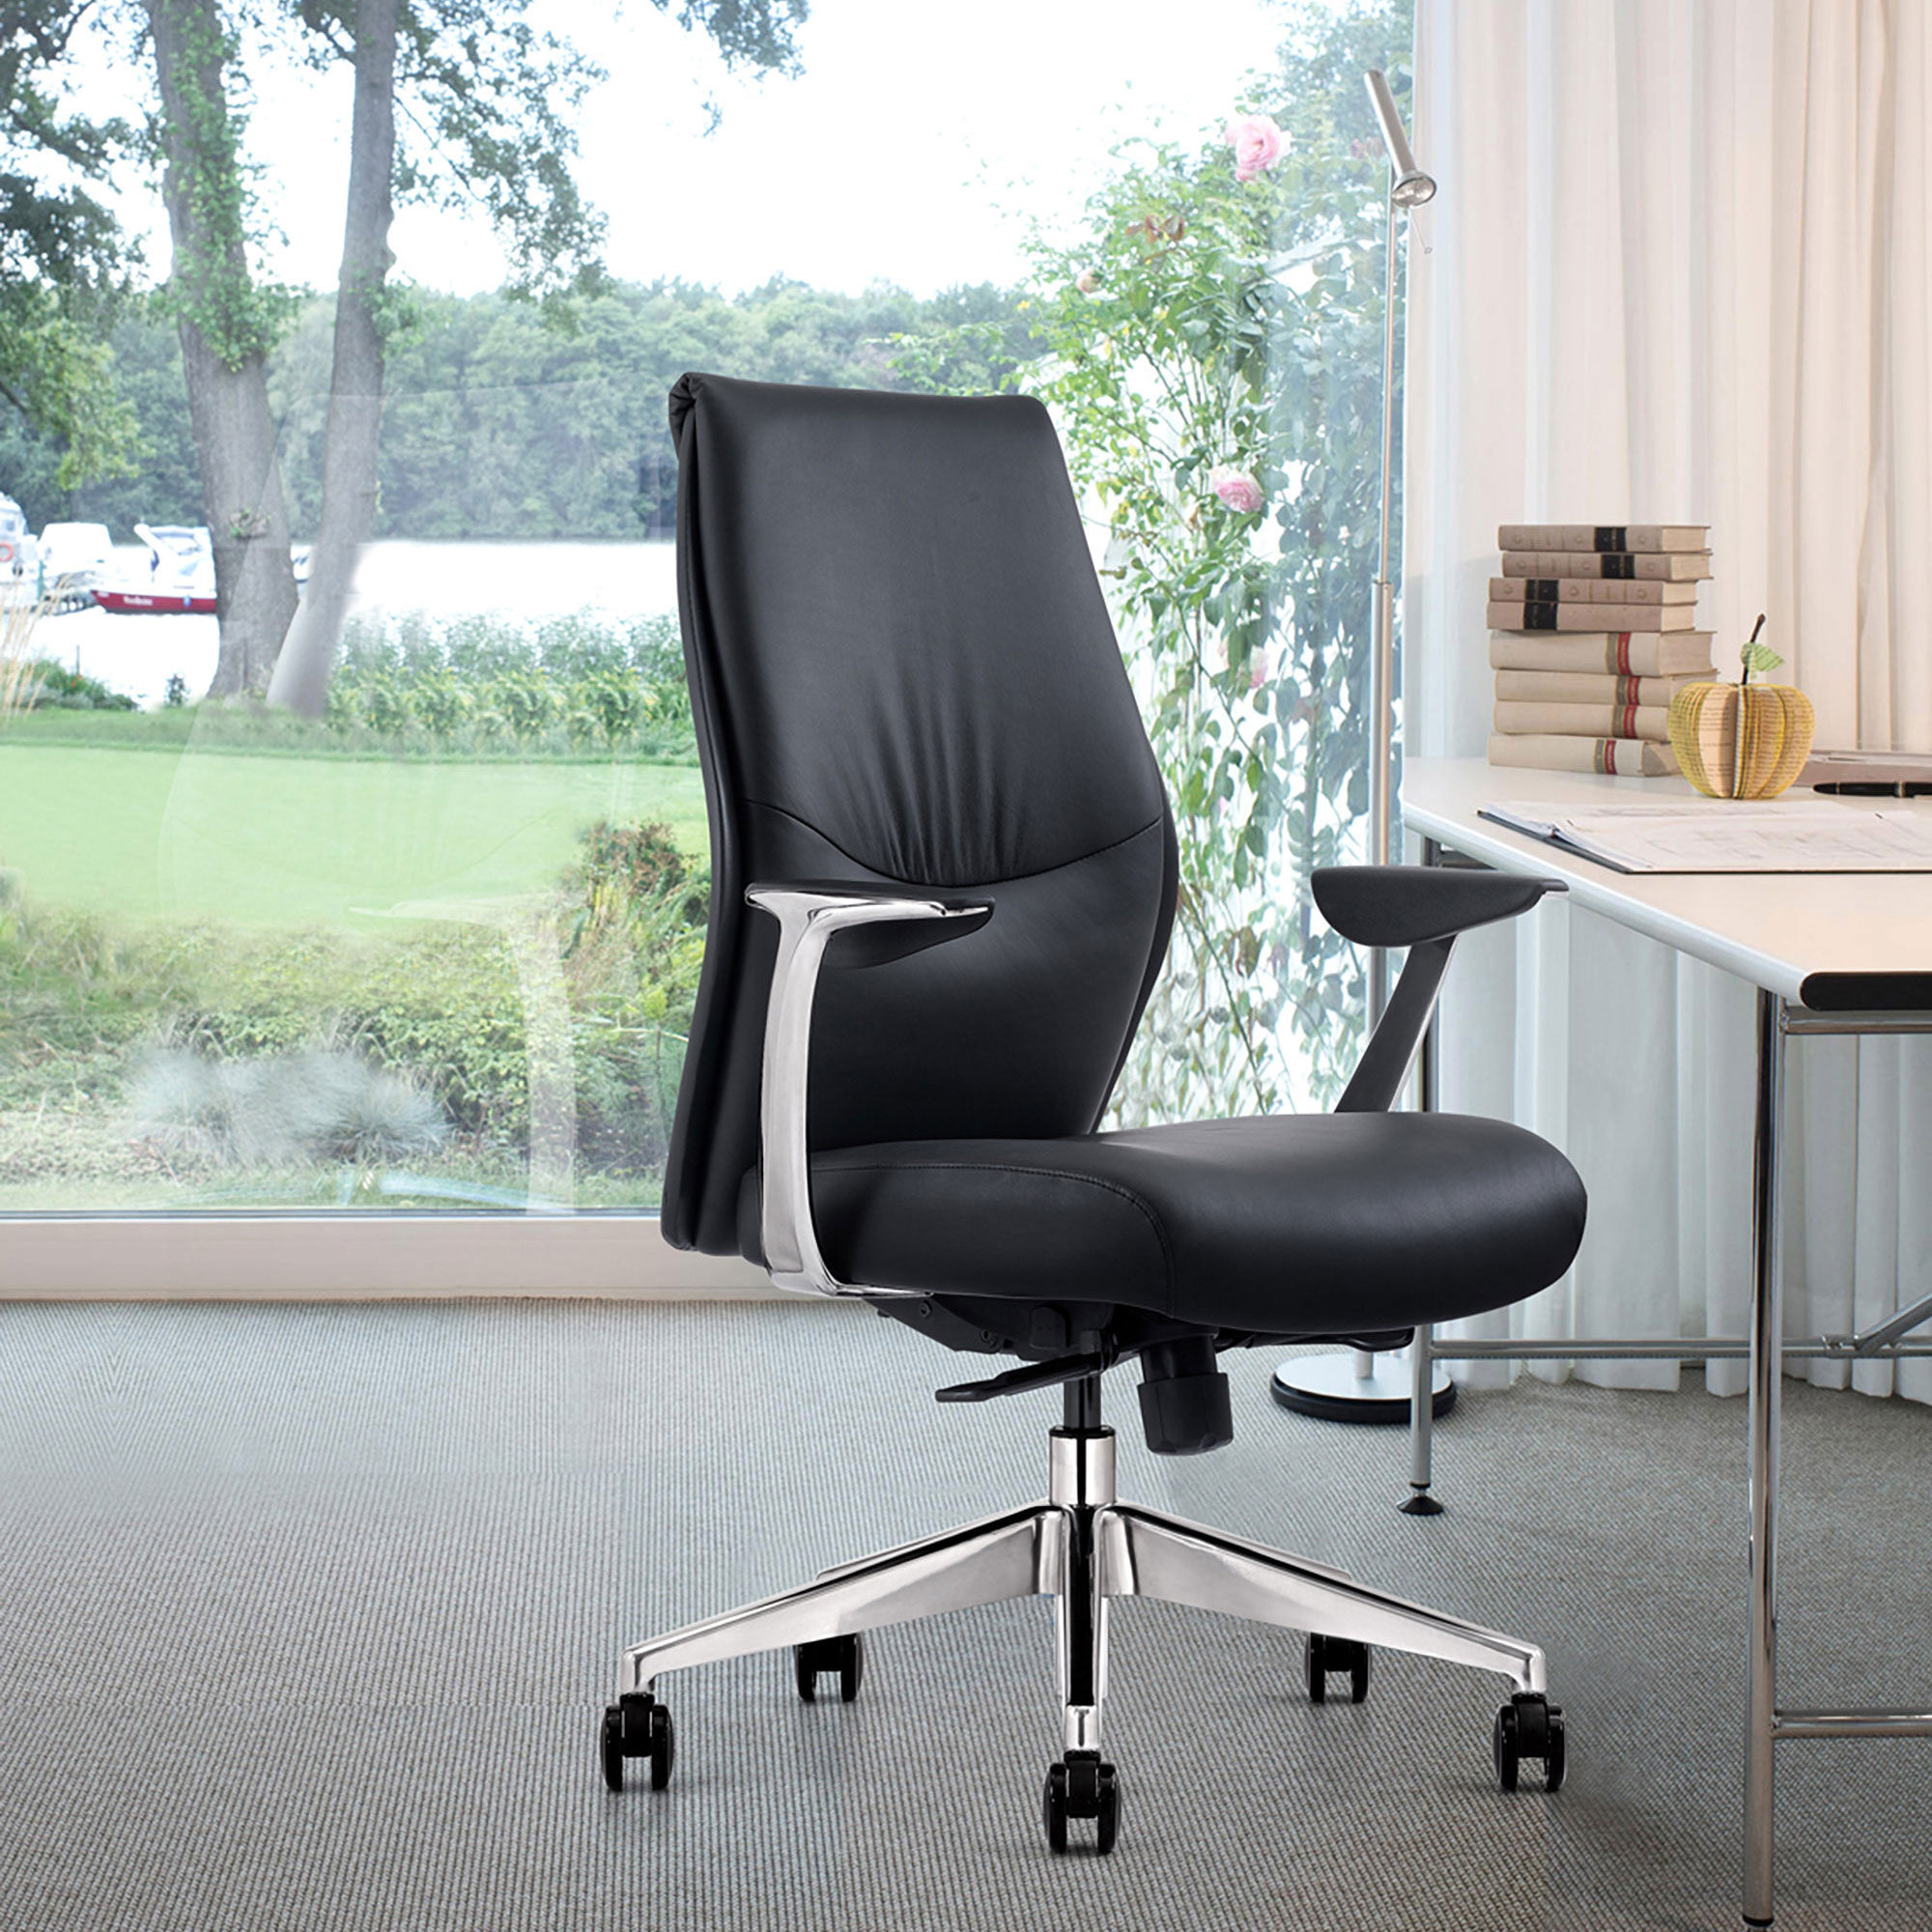 Most Comfortable Office Chair Buzz Seating Home Office